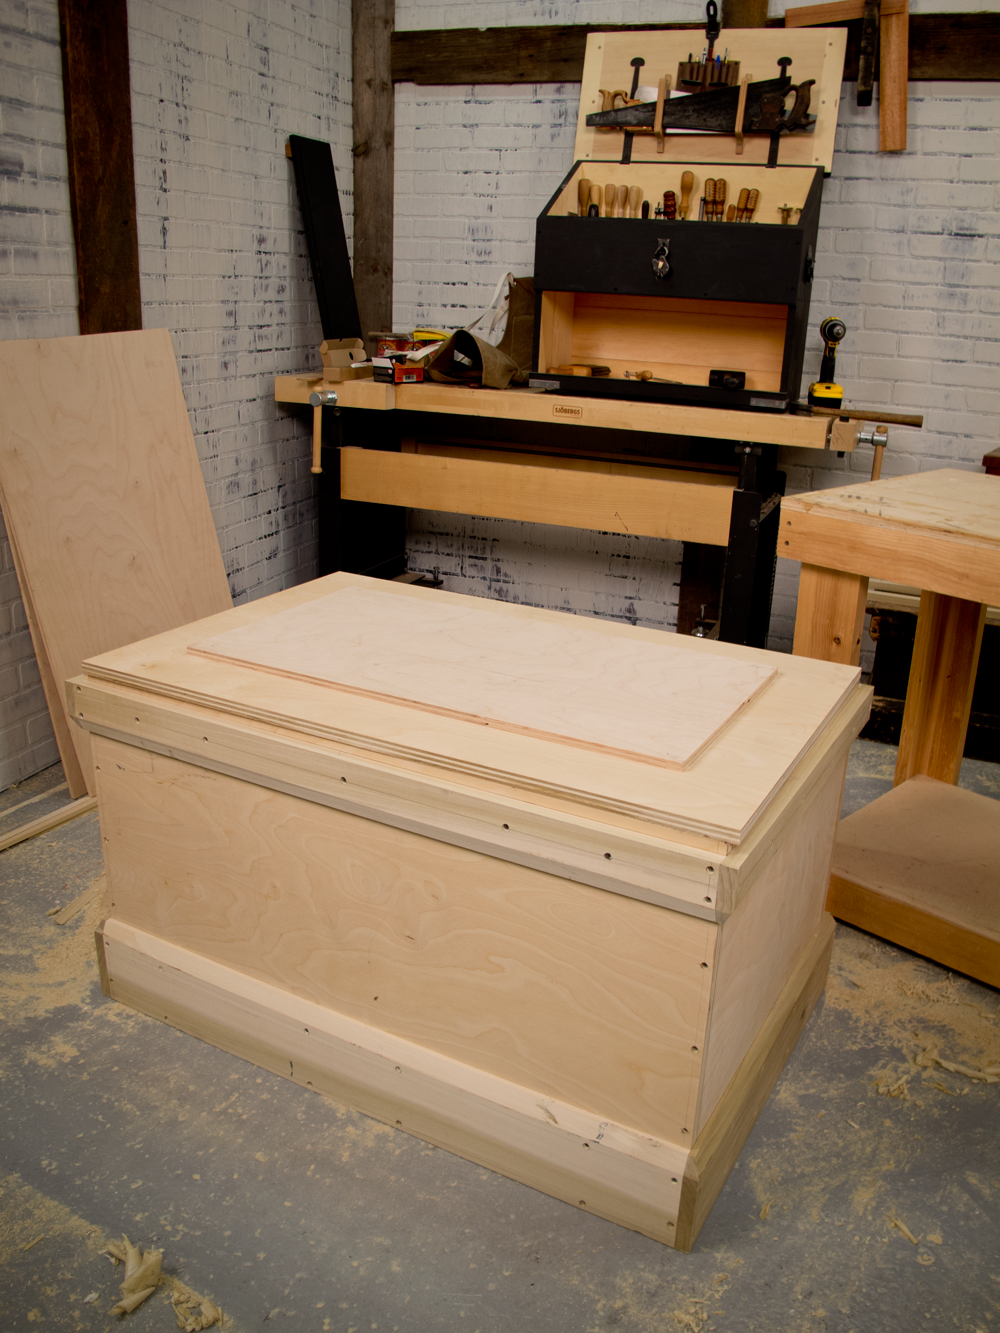 ve now built more than a dozen traditional tool chests entirely by 